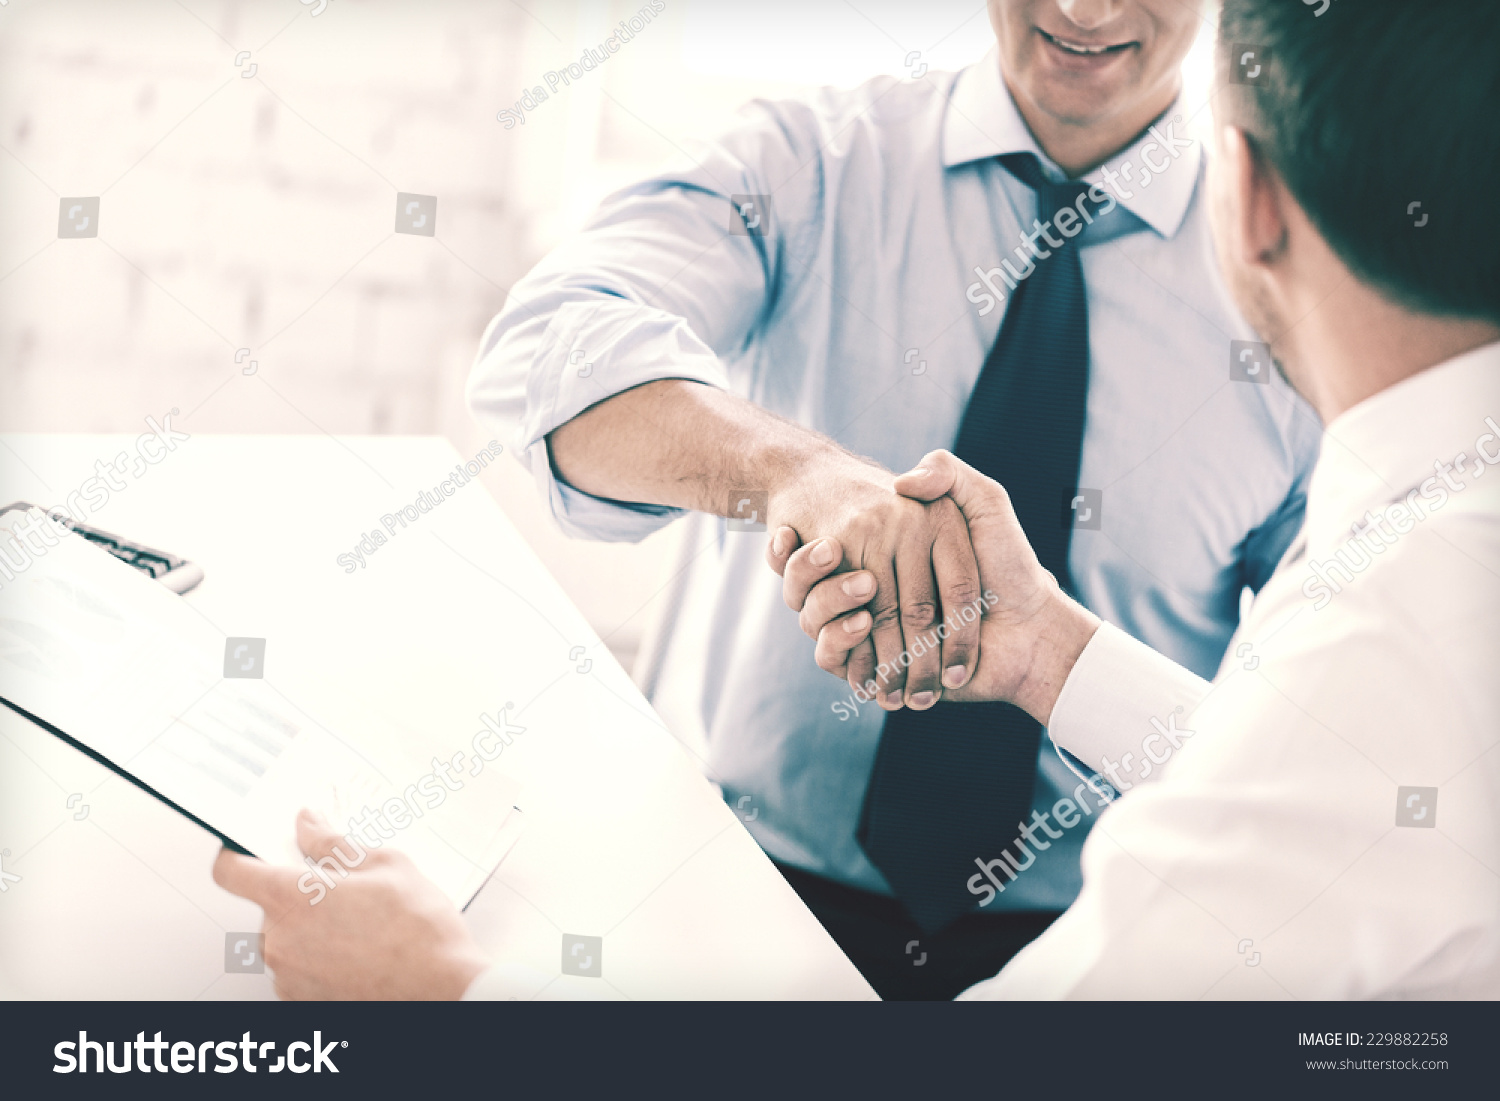 businesss and office concept - two businessmen shaking hands in office #229882258